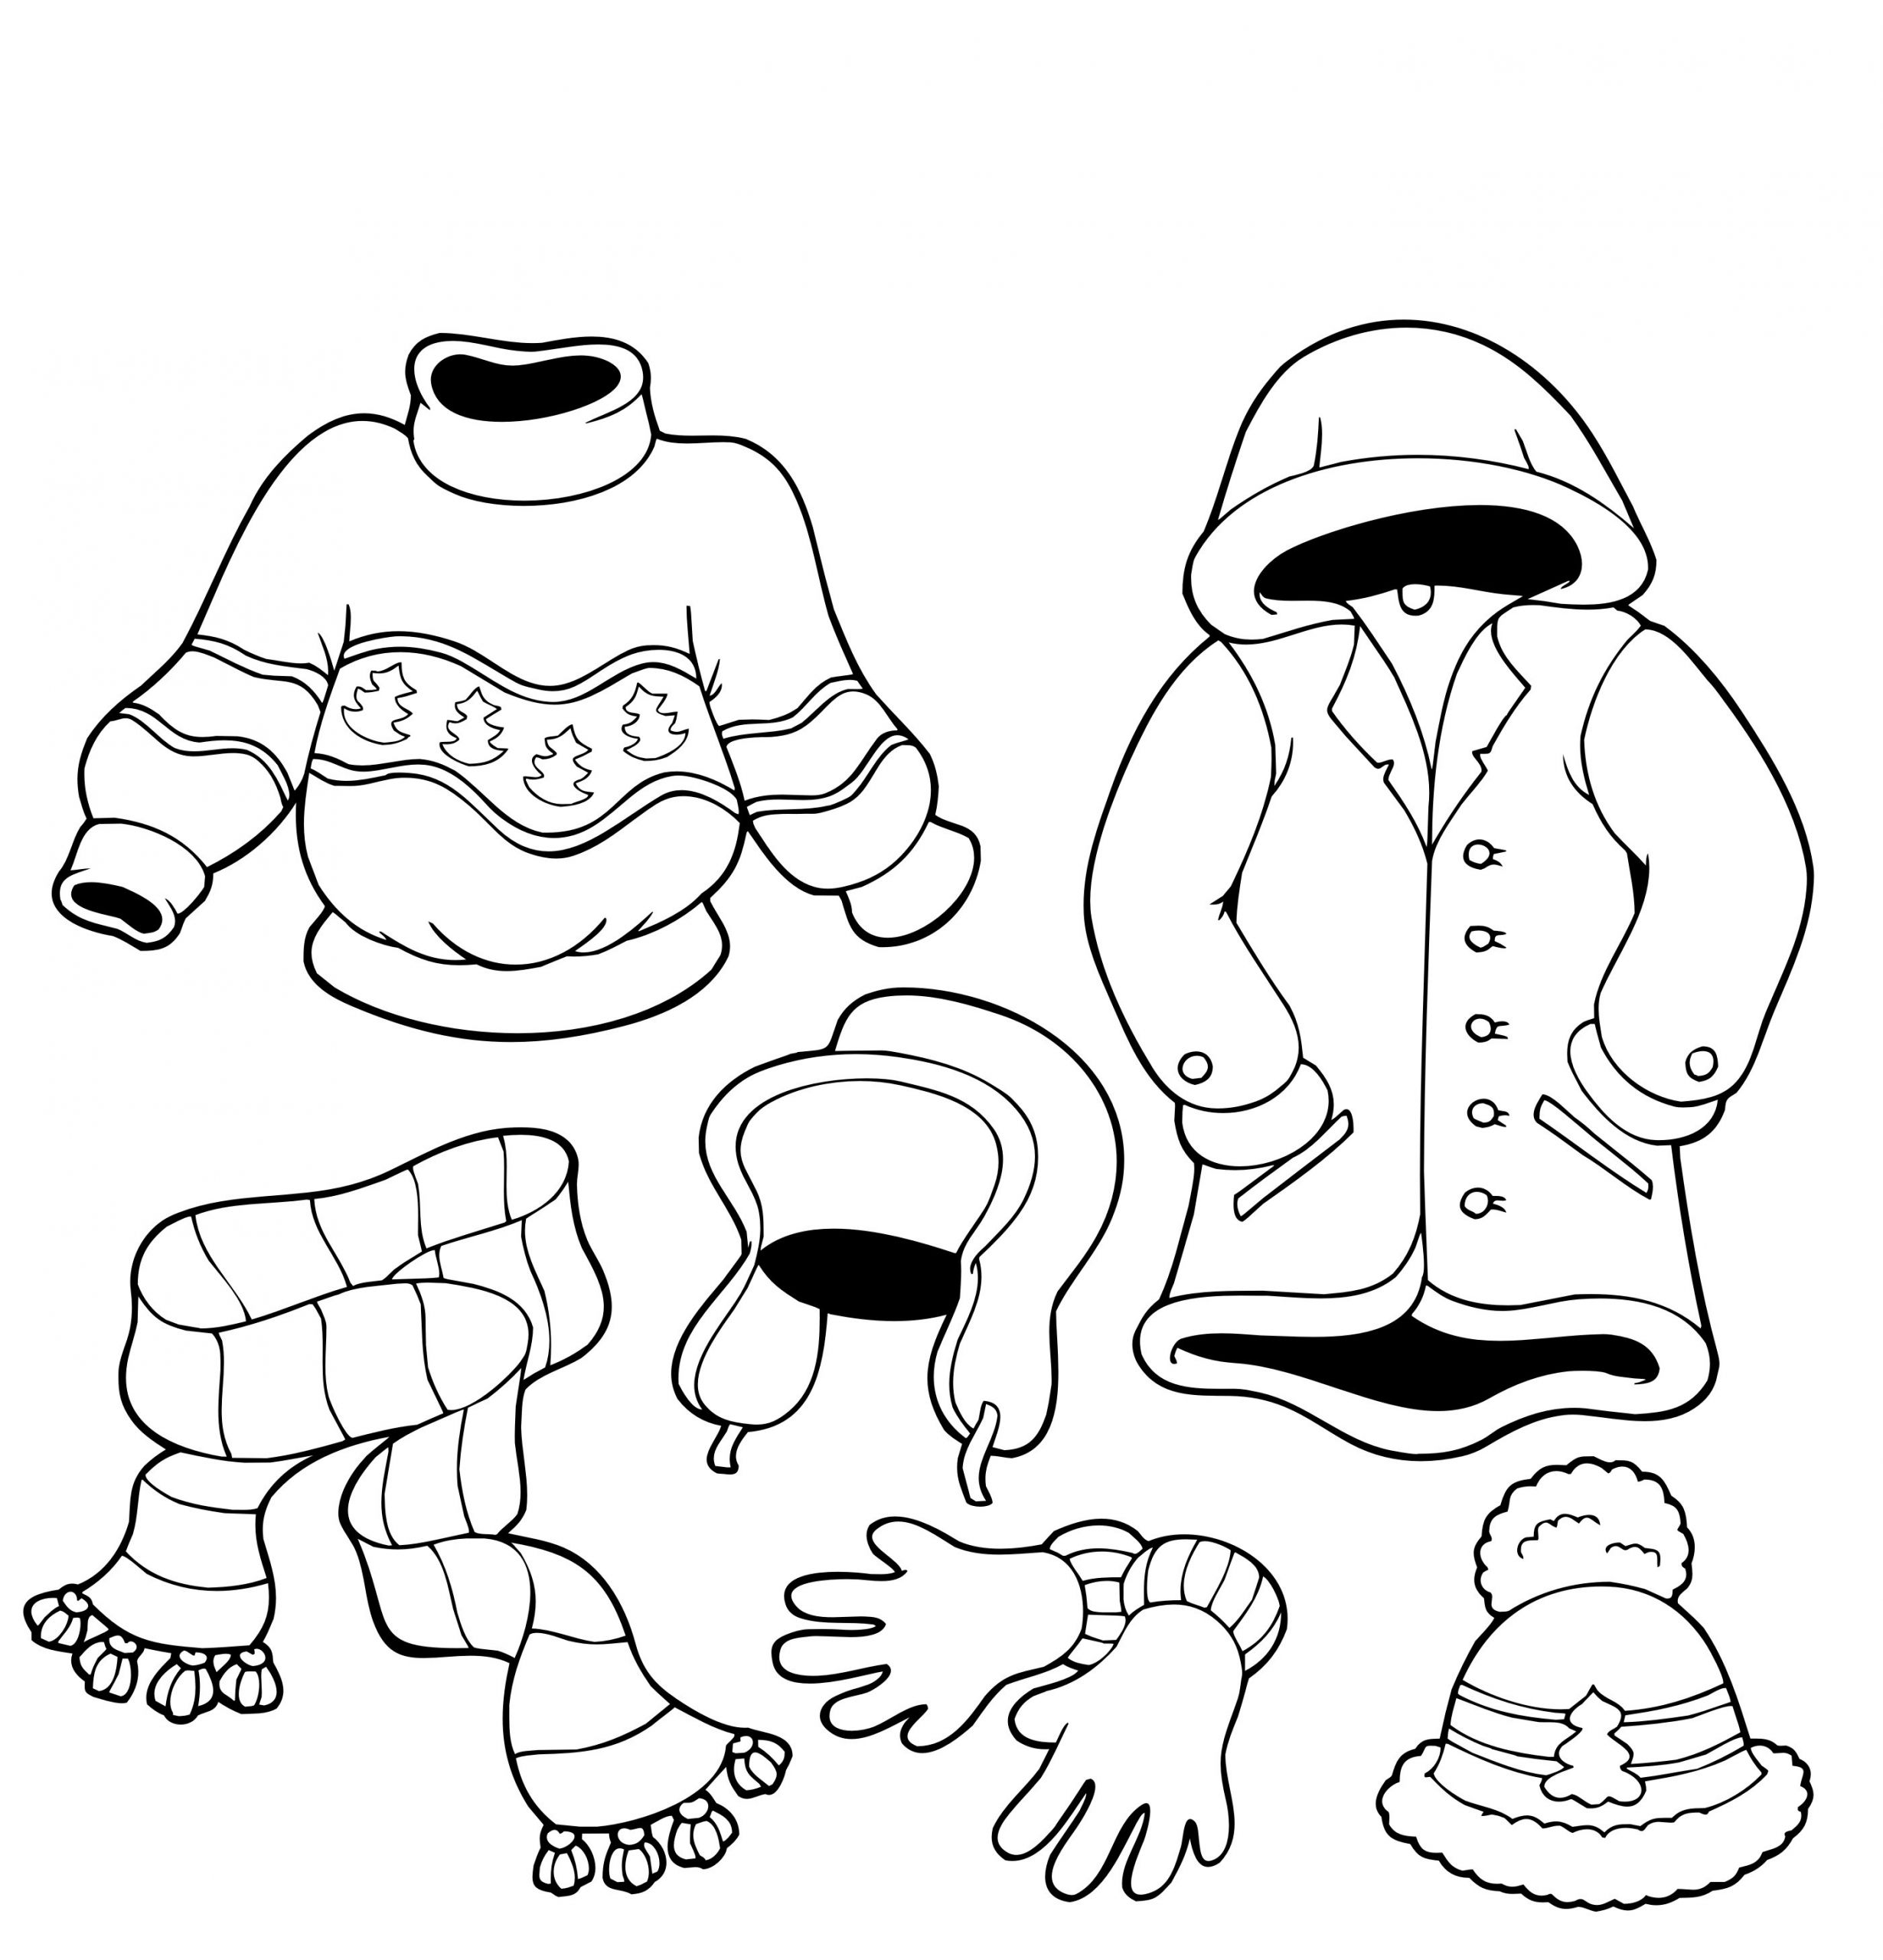 Winter Coloring Pages Printable
 Free Printable Winter Coloring Pages For Kids